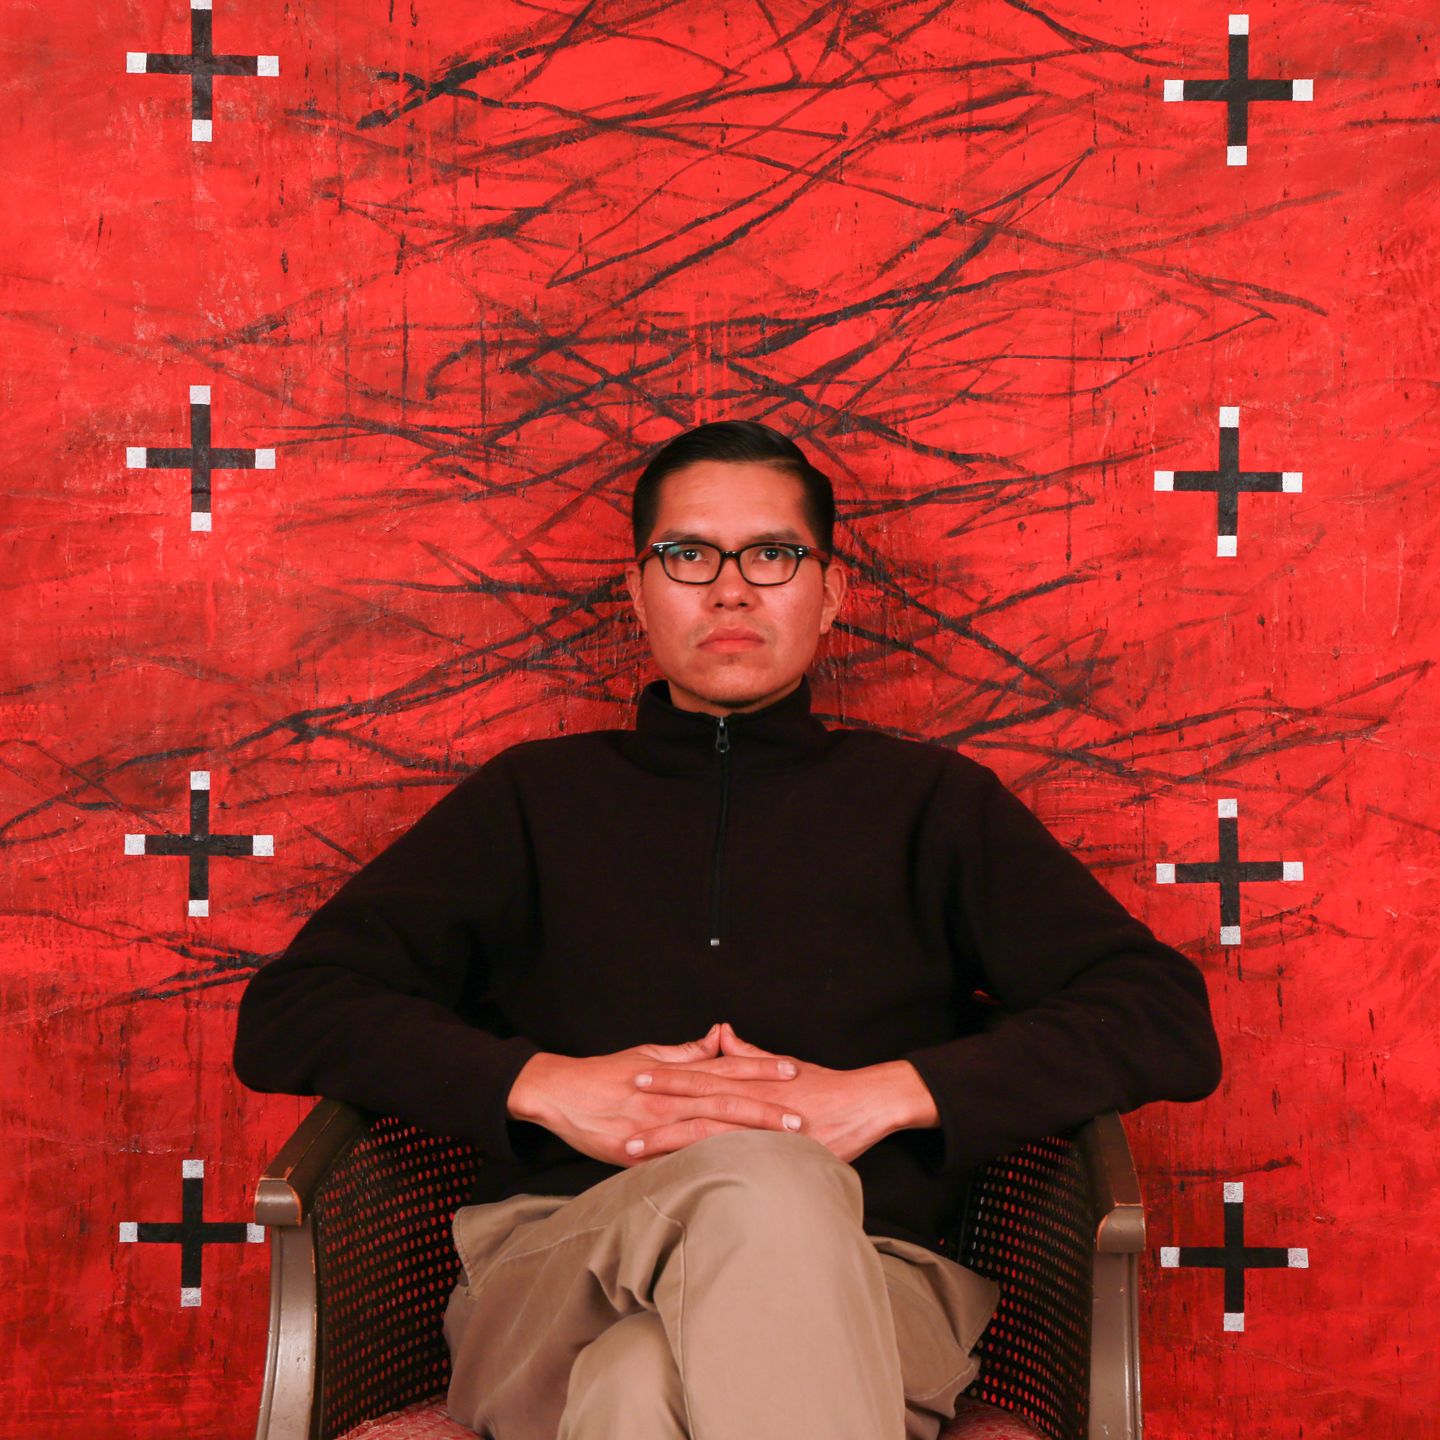 A man in glasses sits on a chair posing in front of a large, saturated red and black painting